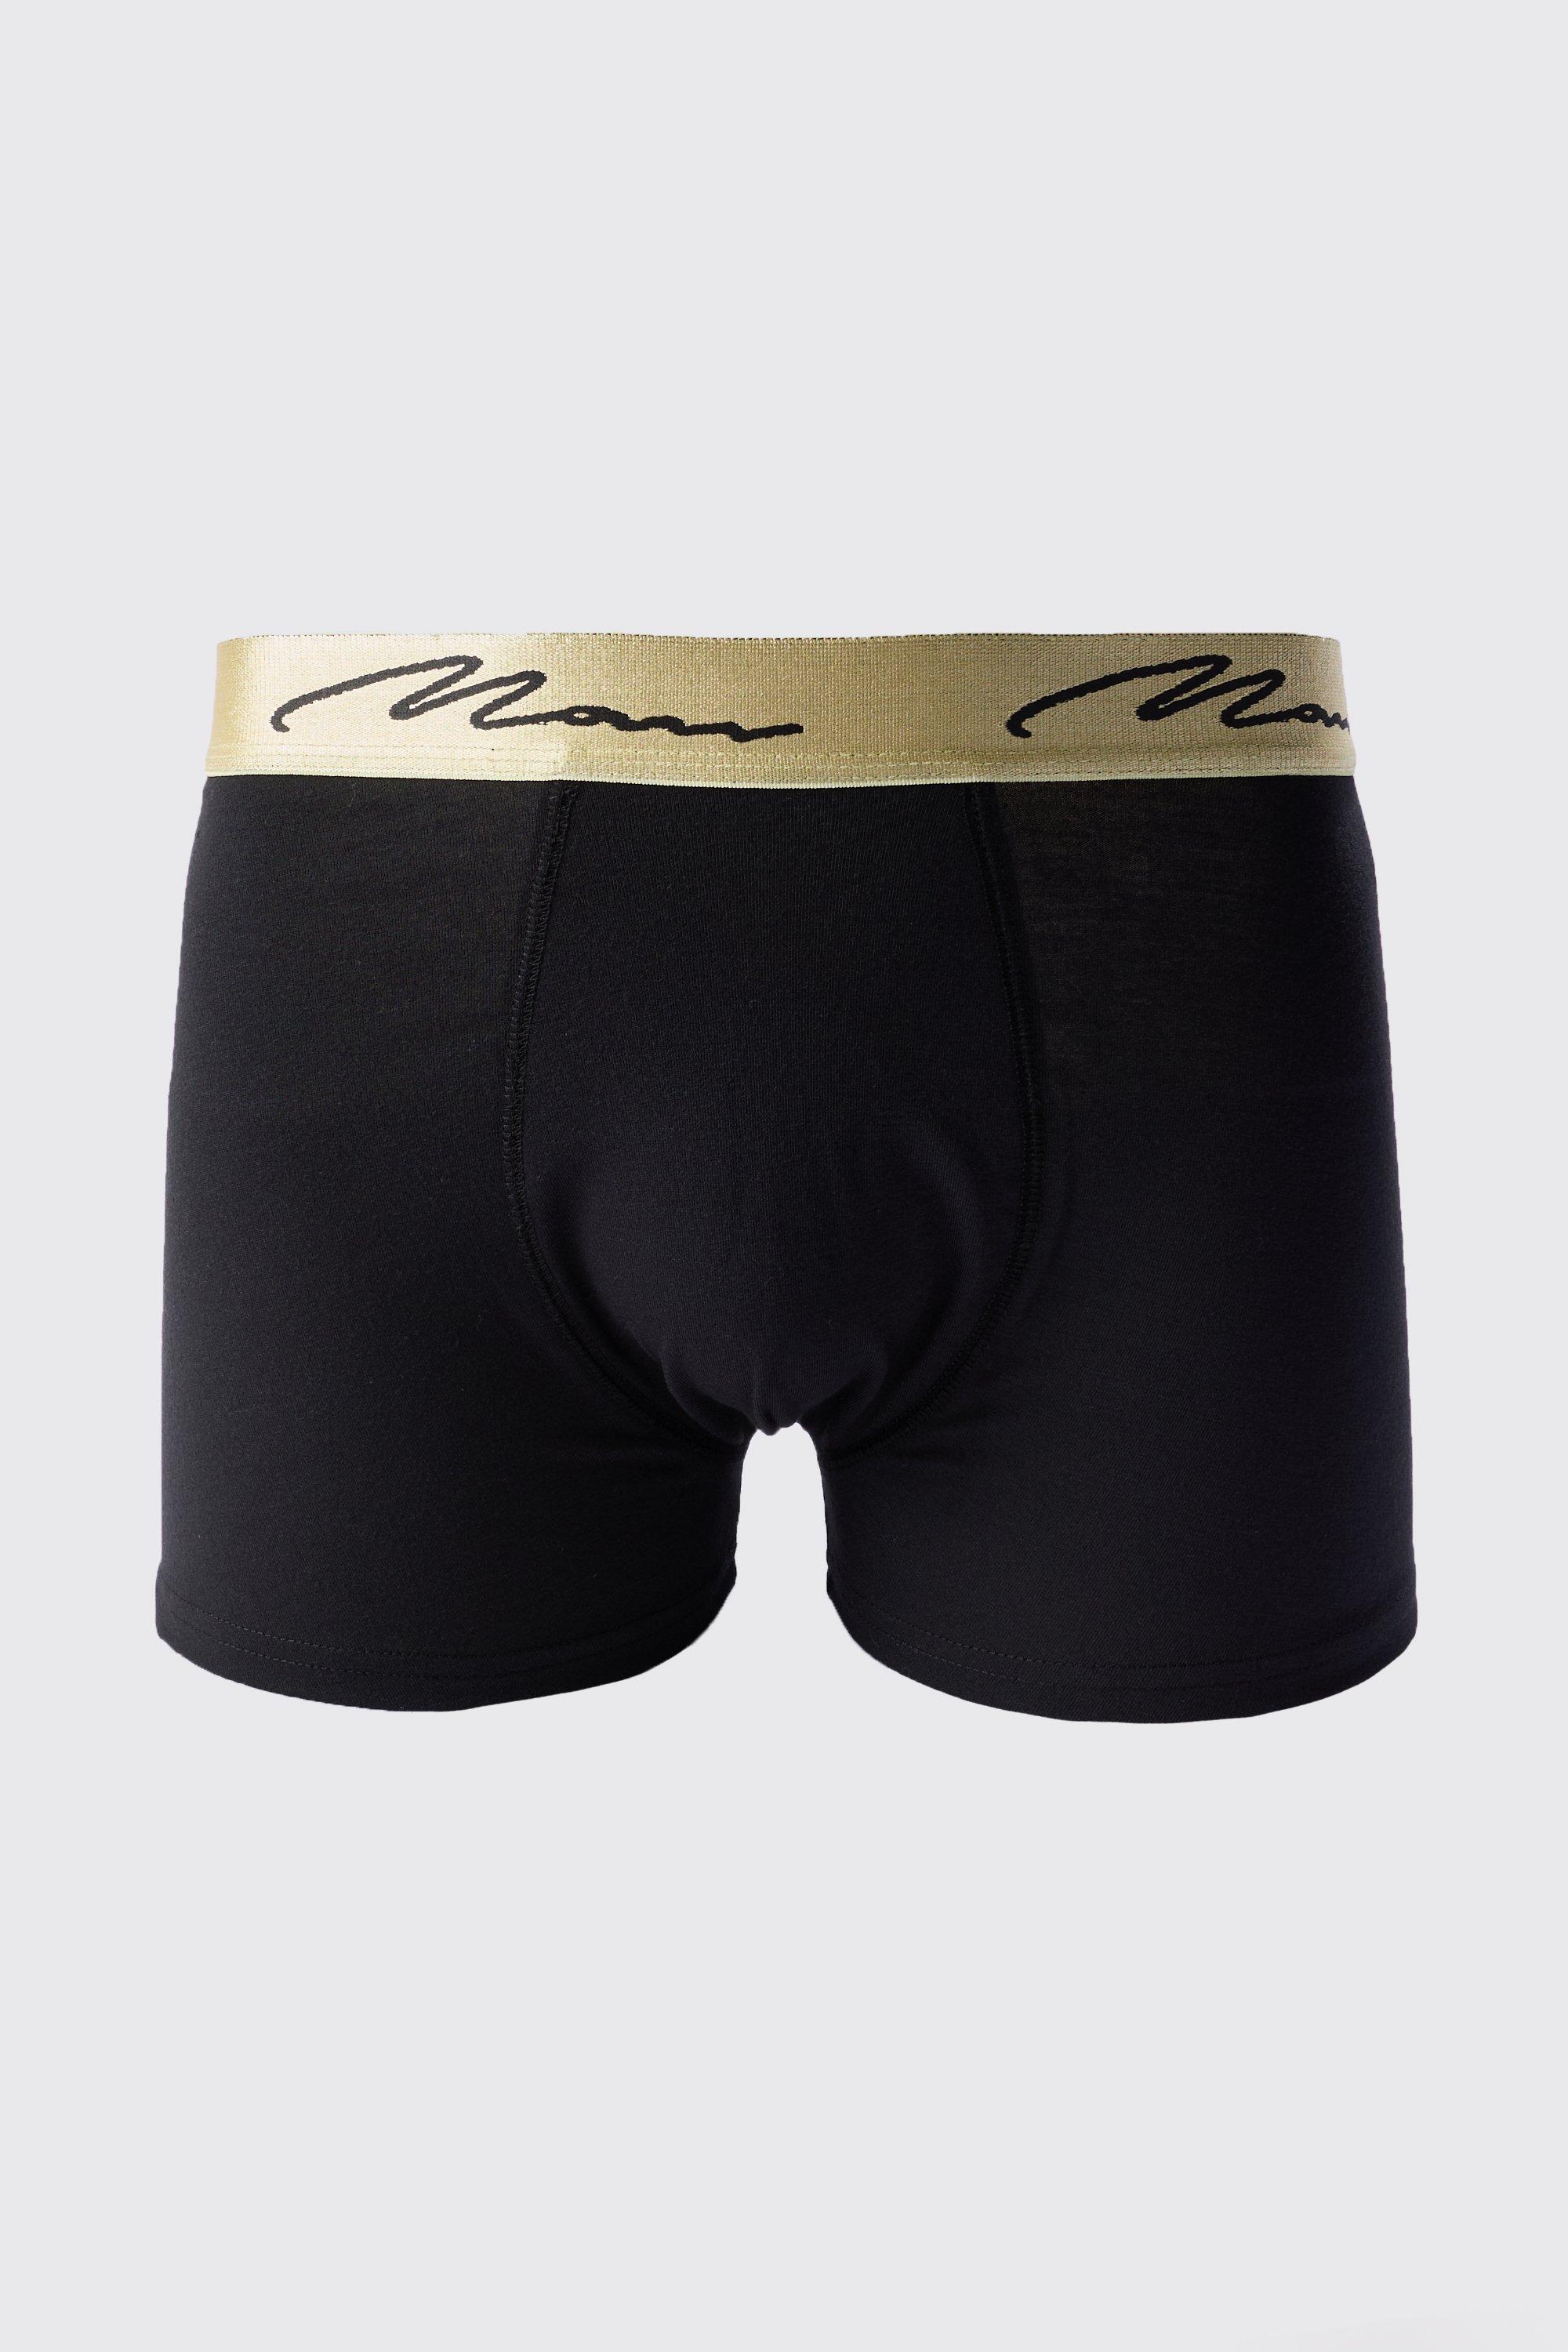 Image of 3 Pack Man Signature Gold Waistband Boxers In Black, Nero